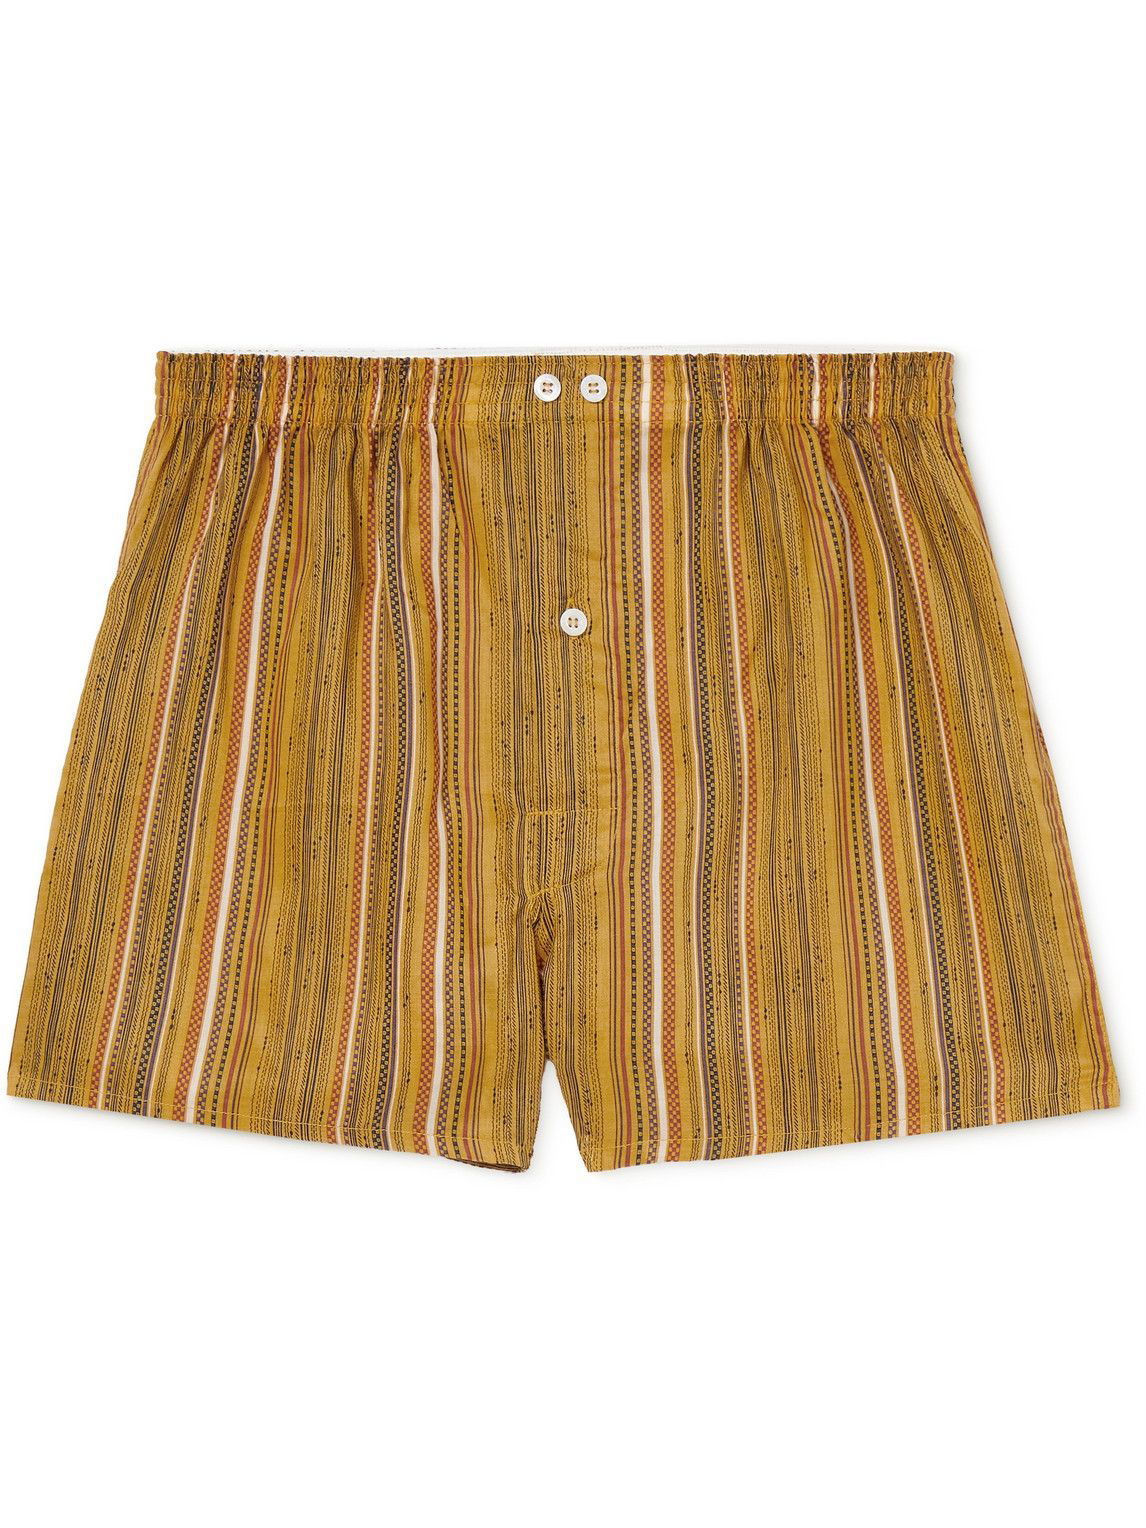 Anonymous ism - Slim-Fit Striped Lyocell Boxer Shorts - Yellow ...